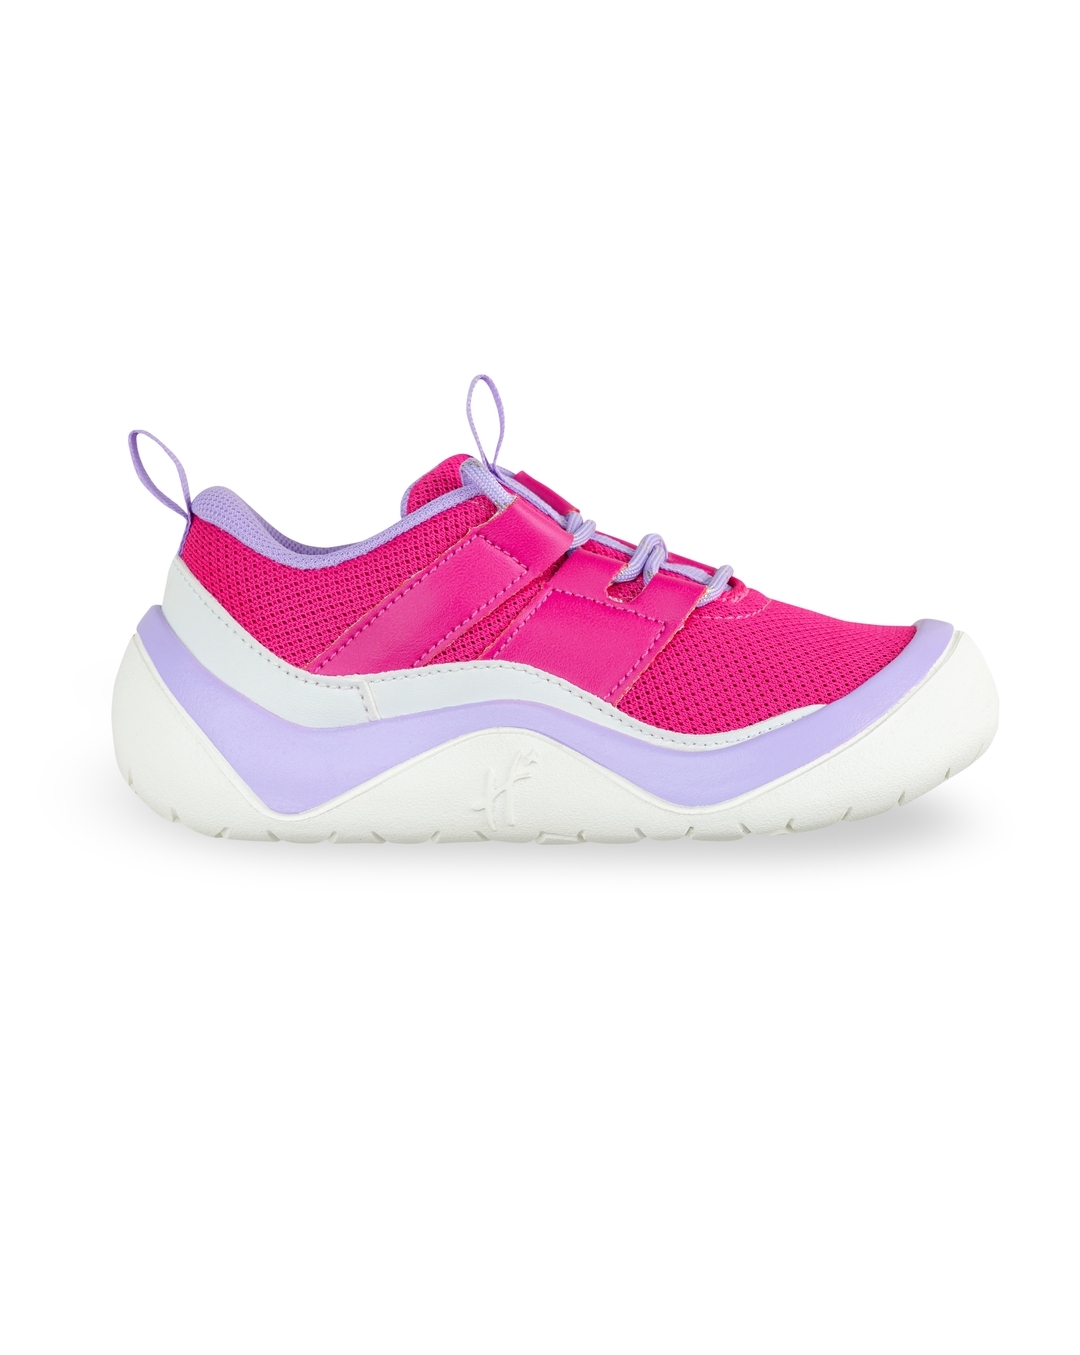 Gubotare Flats Shoes Women Women's Slip On Sneakers, Casual Everyday Shoes  with Drop-in Heel & Breathable Mesh Design, Lightweight,Pink 8 - Walmart.com